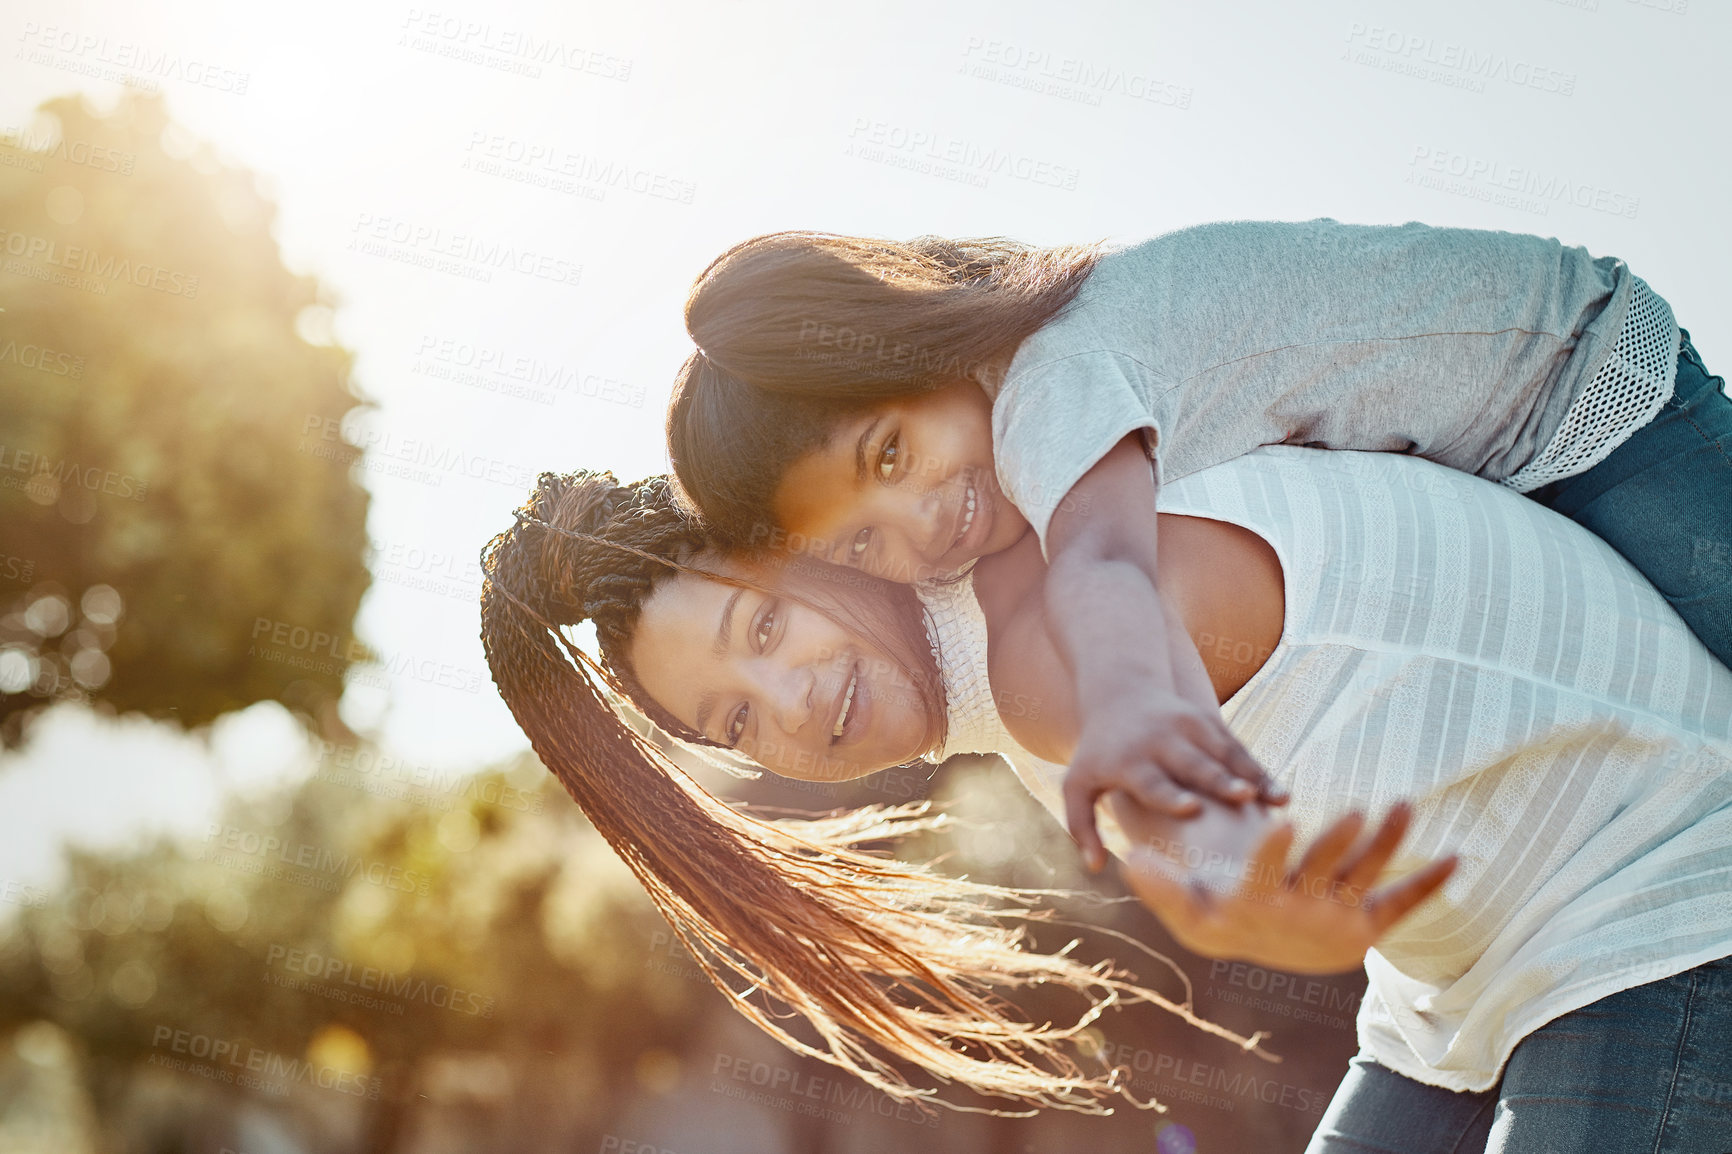 Buy stock photo Portrait of a mother bonding with her daughter outdoors